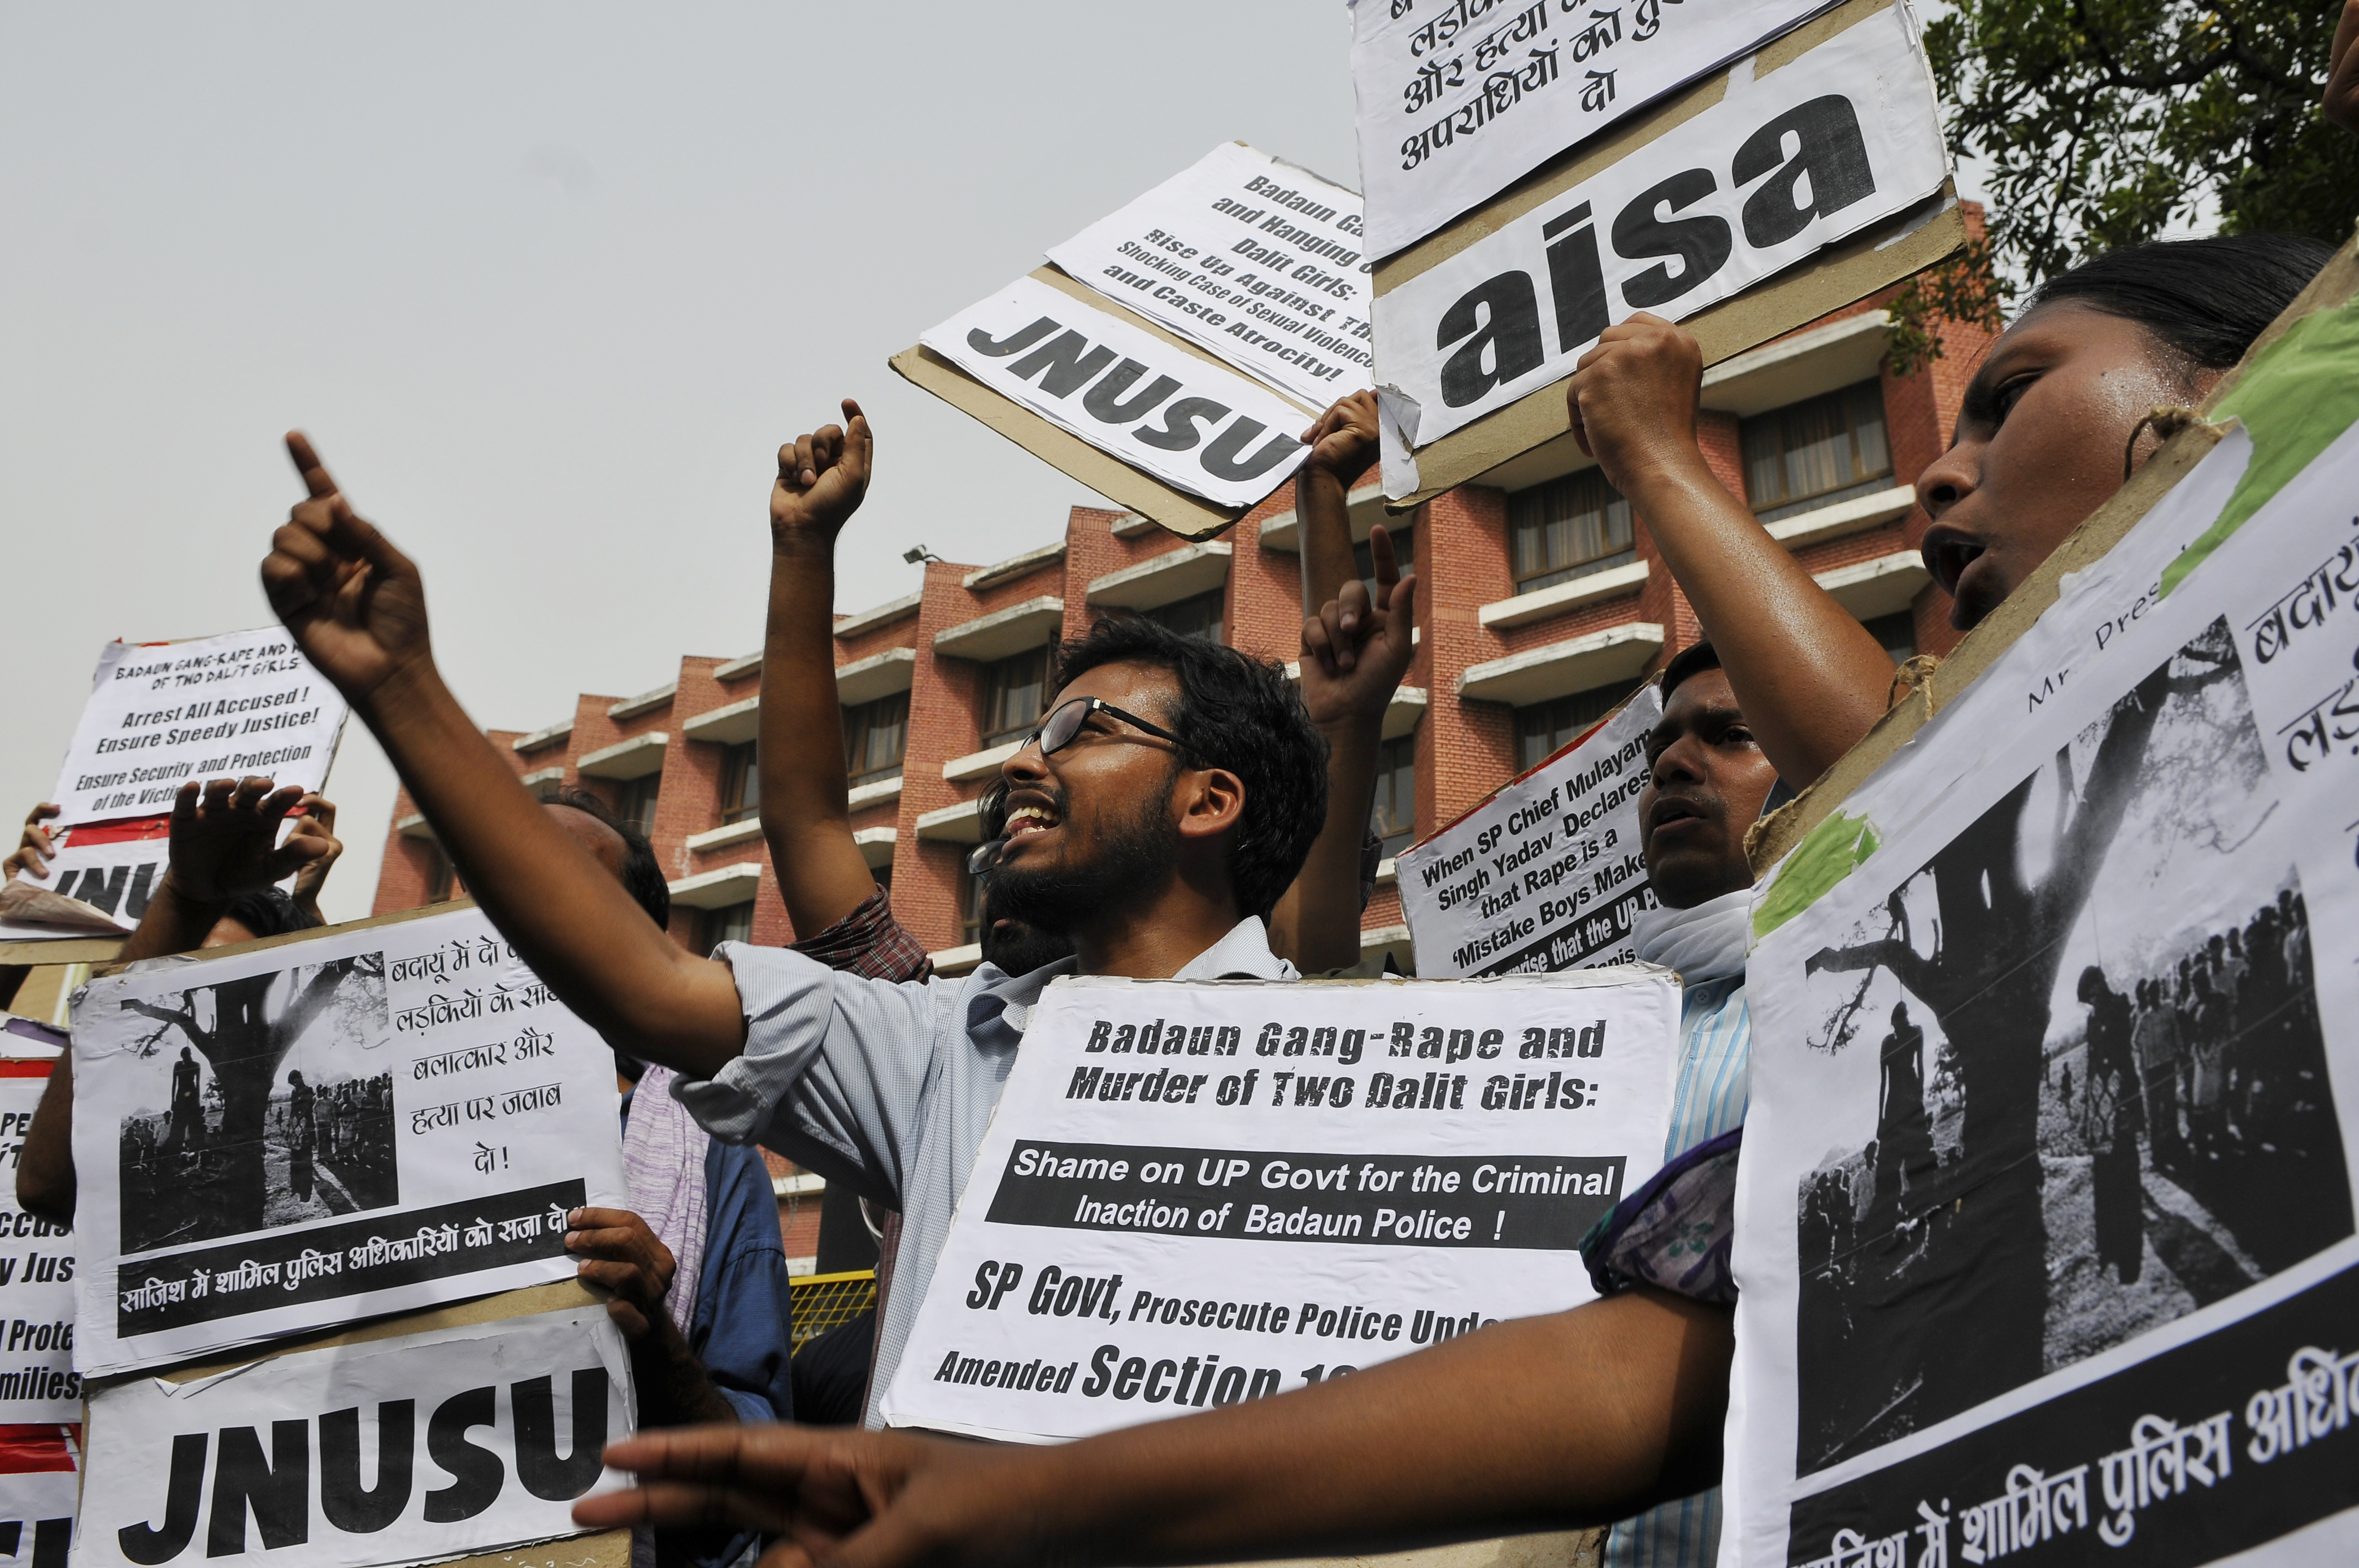 Jawaharlal Nehru University Students Union activists shouting slogans in front of Uttar Pradesh Bhawan against the gruesome gang-rape and hanging of two Dalit girls in Badaun, demanding immediate arrest of all the culprits on May 30, 2014 in New Delhi, India. (Hindustan Times&mdash;Hindustan Times via Getty Images)